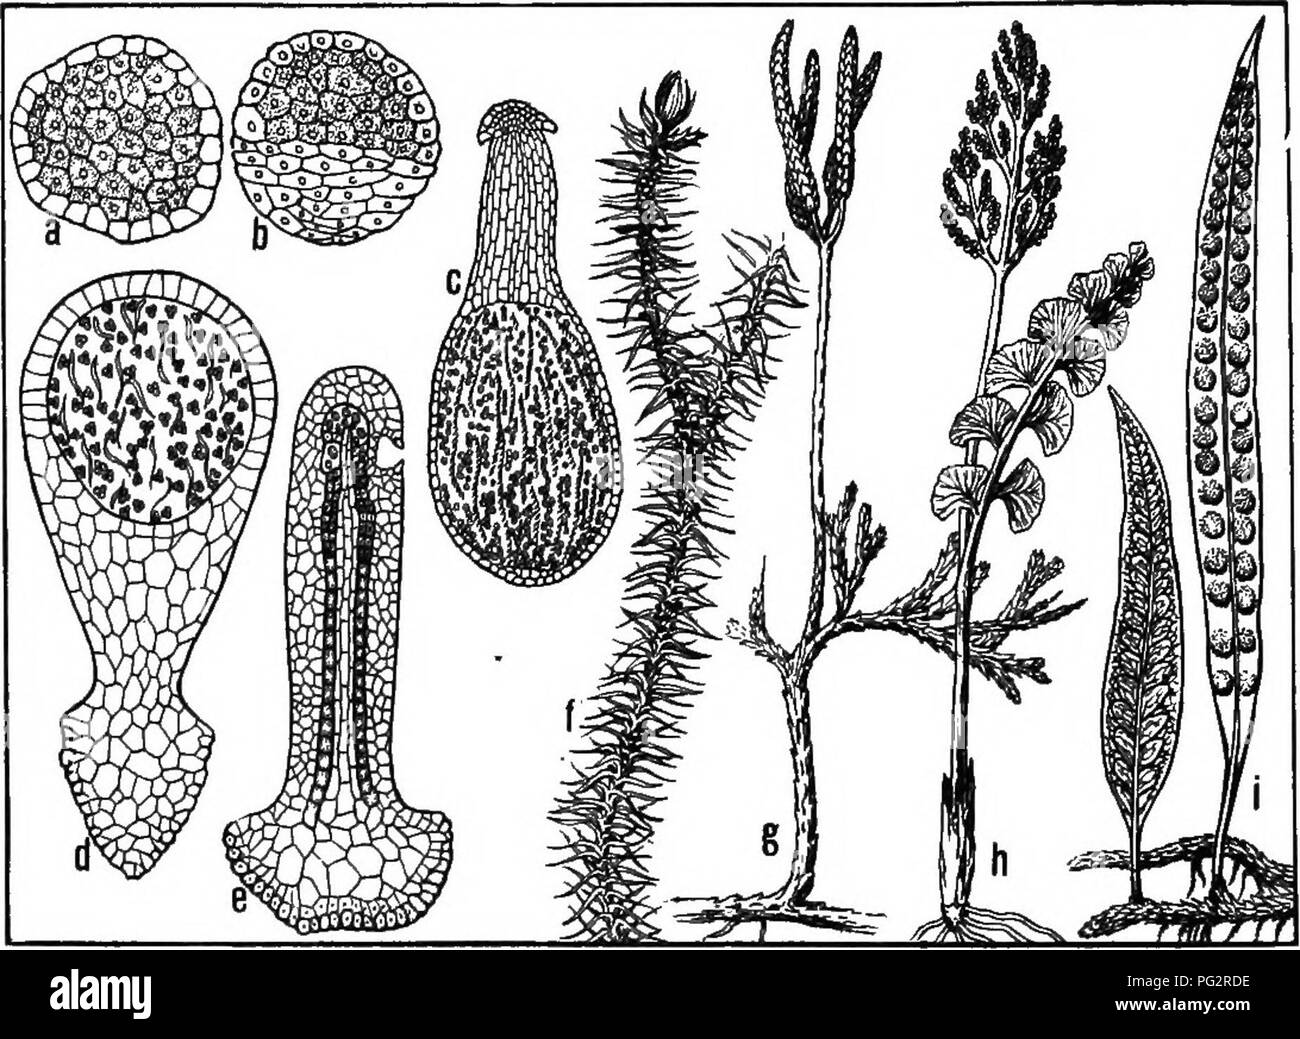 . Heredity and evolution in plants. Heredity; Plants. 128 HEREDITY AND EVOLUTION IN PLANTS monocotyledony seems the simpler, more primitive condi- tion, it is really a later phenomenon, the monocotyledons being derived from the dicotyledons by simplification.^ As a further example there may be cited the application of the method of comparative anatomy to solve the problem. Fig. 65.—Progressive sterilization of tissue in sporophytes. a, Riccia trickocarpa (mature); b, Marchantia polymorpha (embryo); c, Marchantia (mature); d, Porrella, a leafy liverwort (mature); e, anthoceros; /, Lyca- podium  Stock Photo